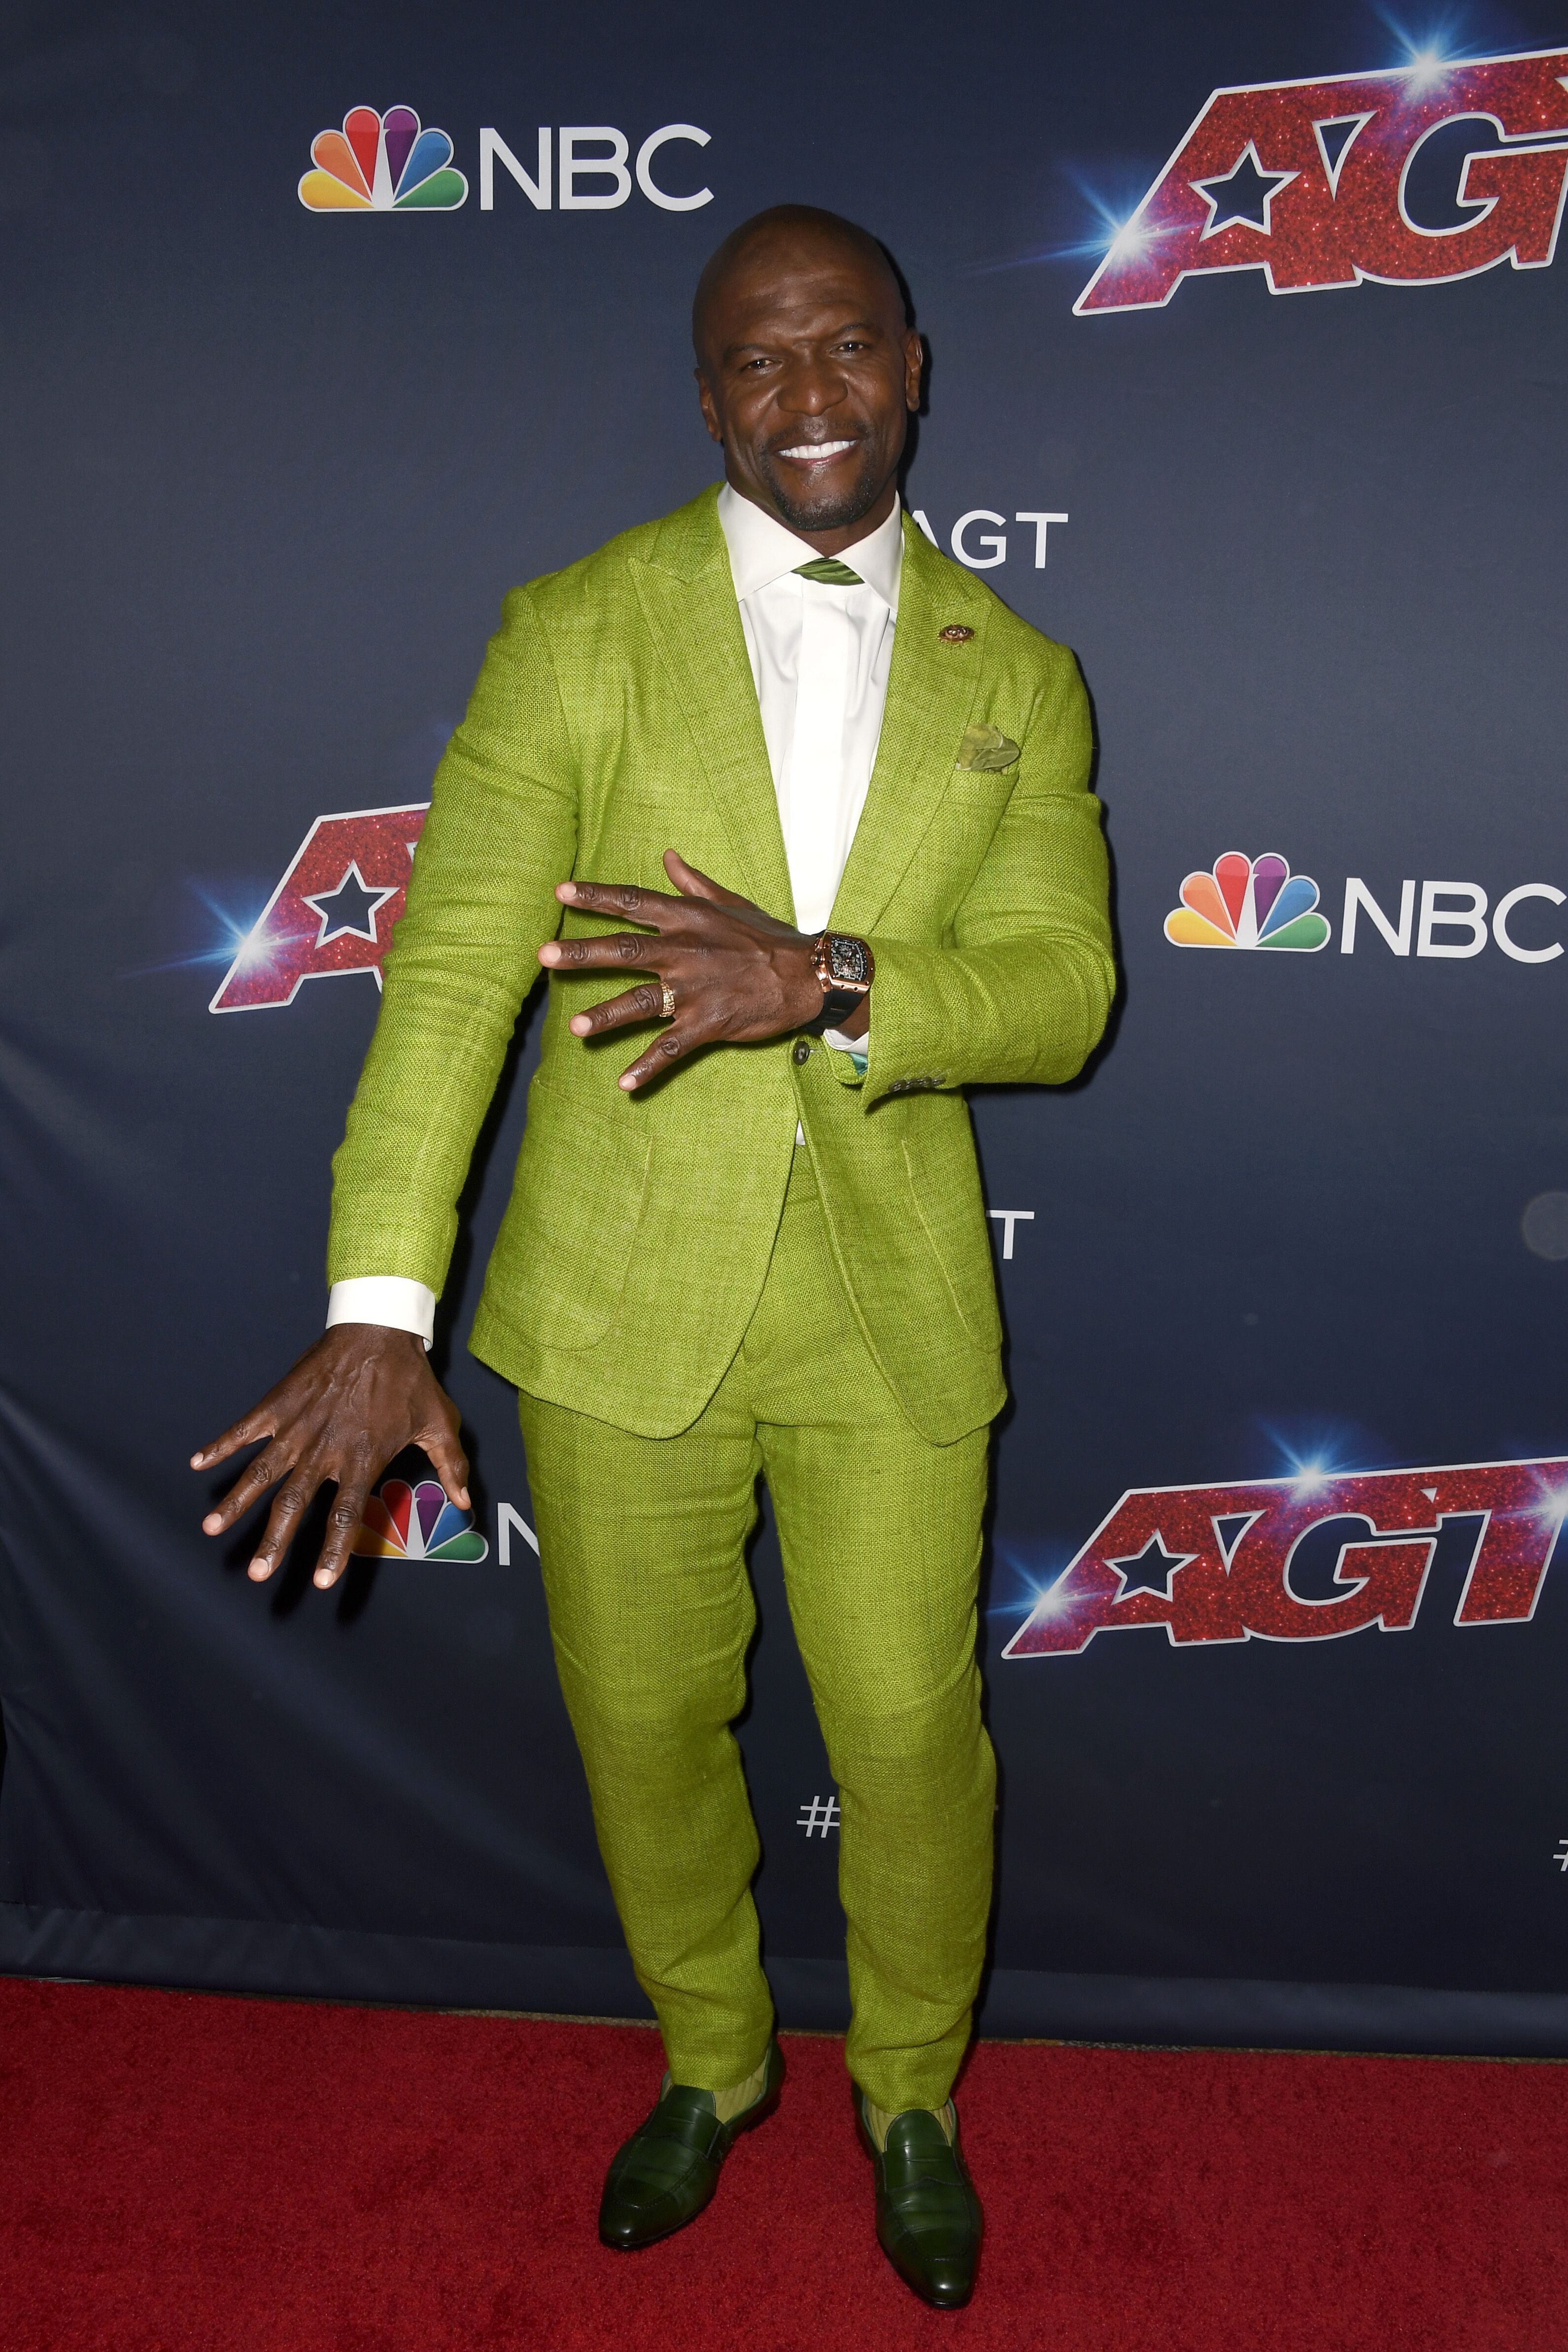 TV host and actor Terry Crews at the season's premiere for "America's Got Talent"/ Source: Getty Images